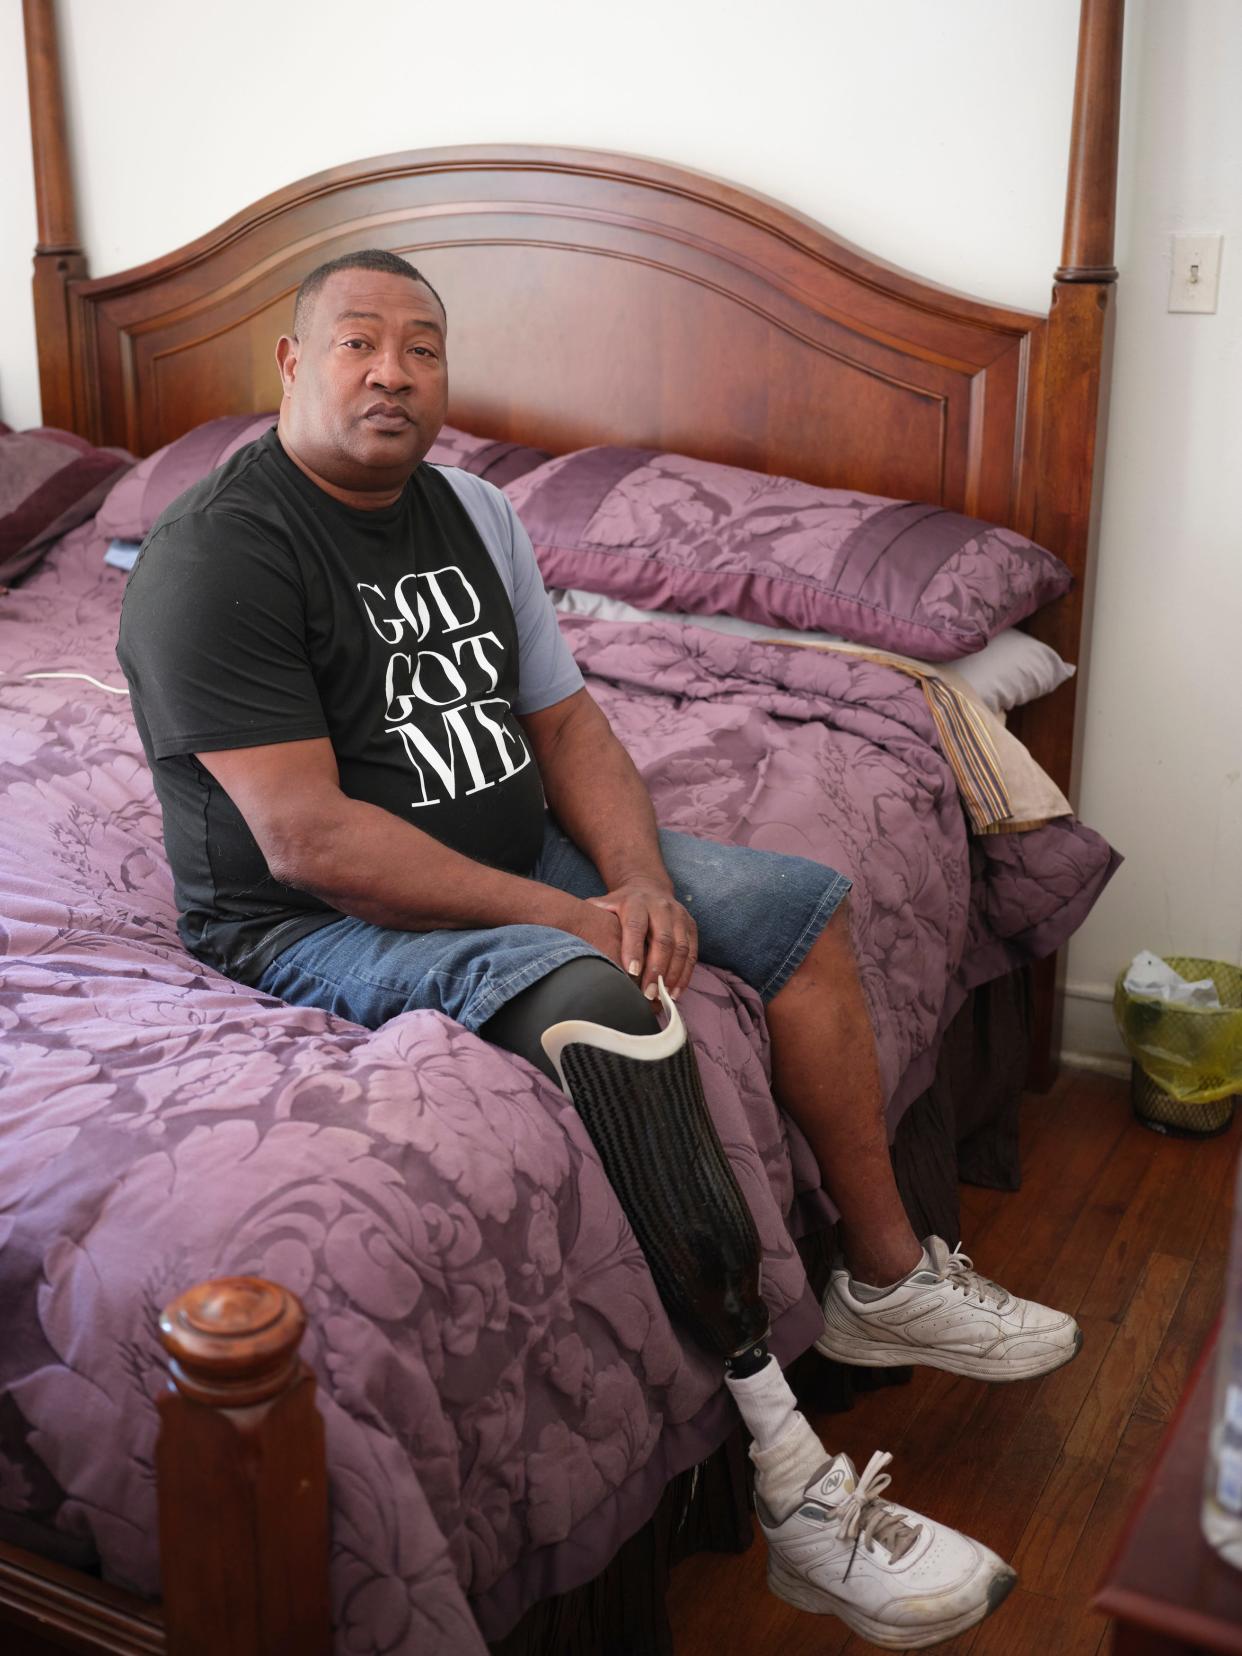 “It’s a totally different life, “ James Haynes said after losing his foot. He can’t work on cars anymore, something he loved to do. “If I can’t get help I need to train myself. If this is my life now, I need to accept it.”